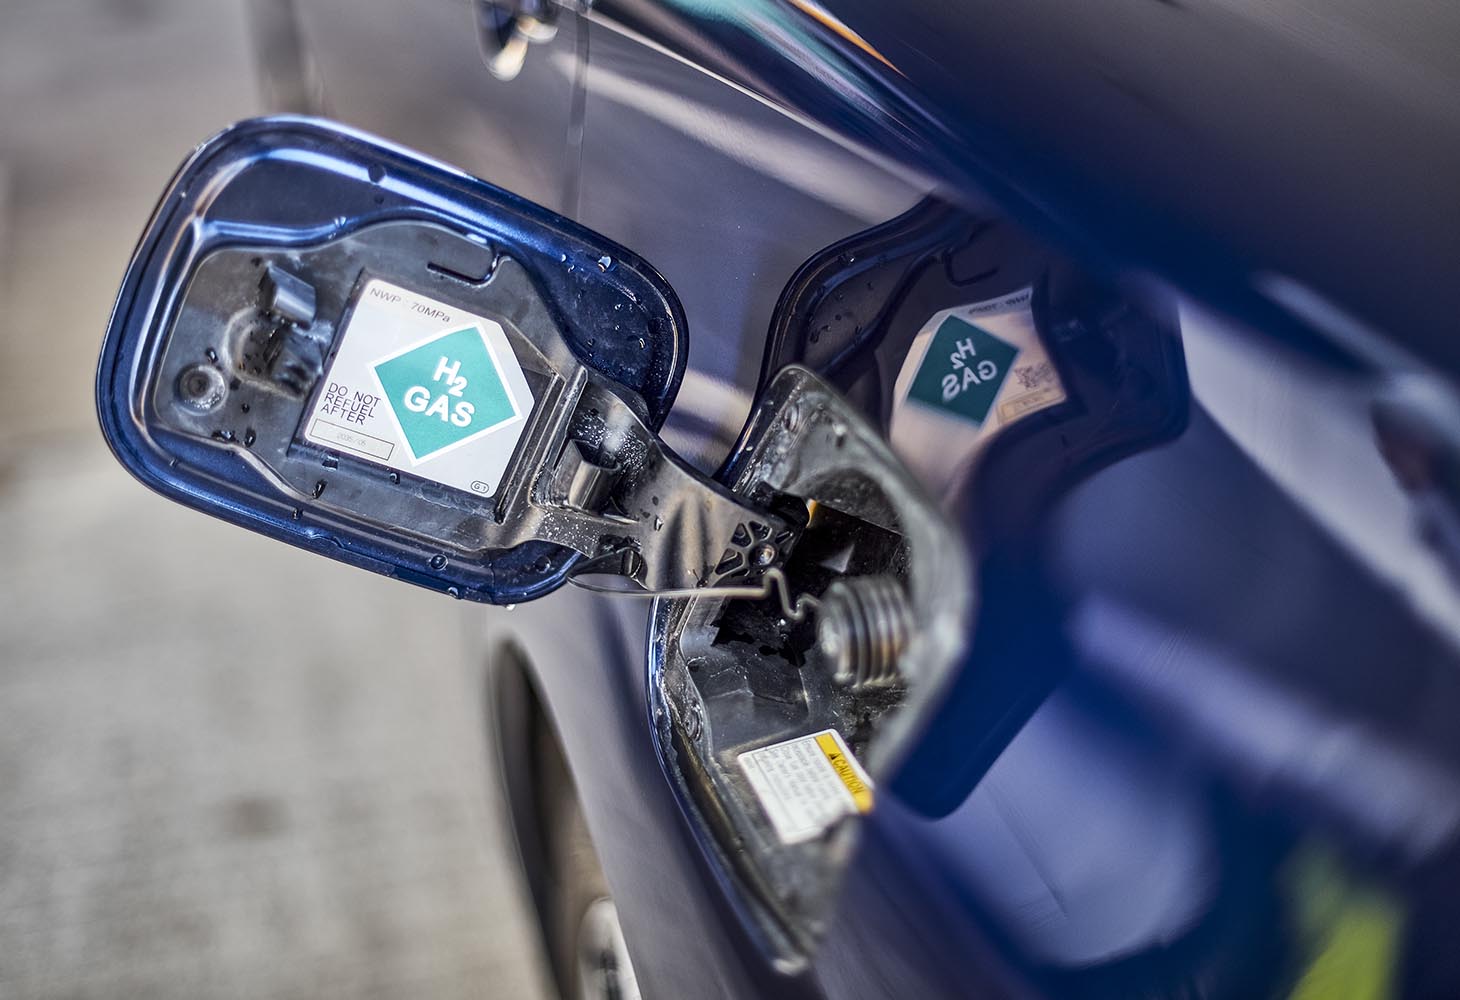 By 2060, hydrogen-based fuels may meet 25% of China's transport needs